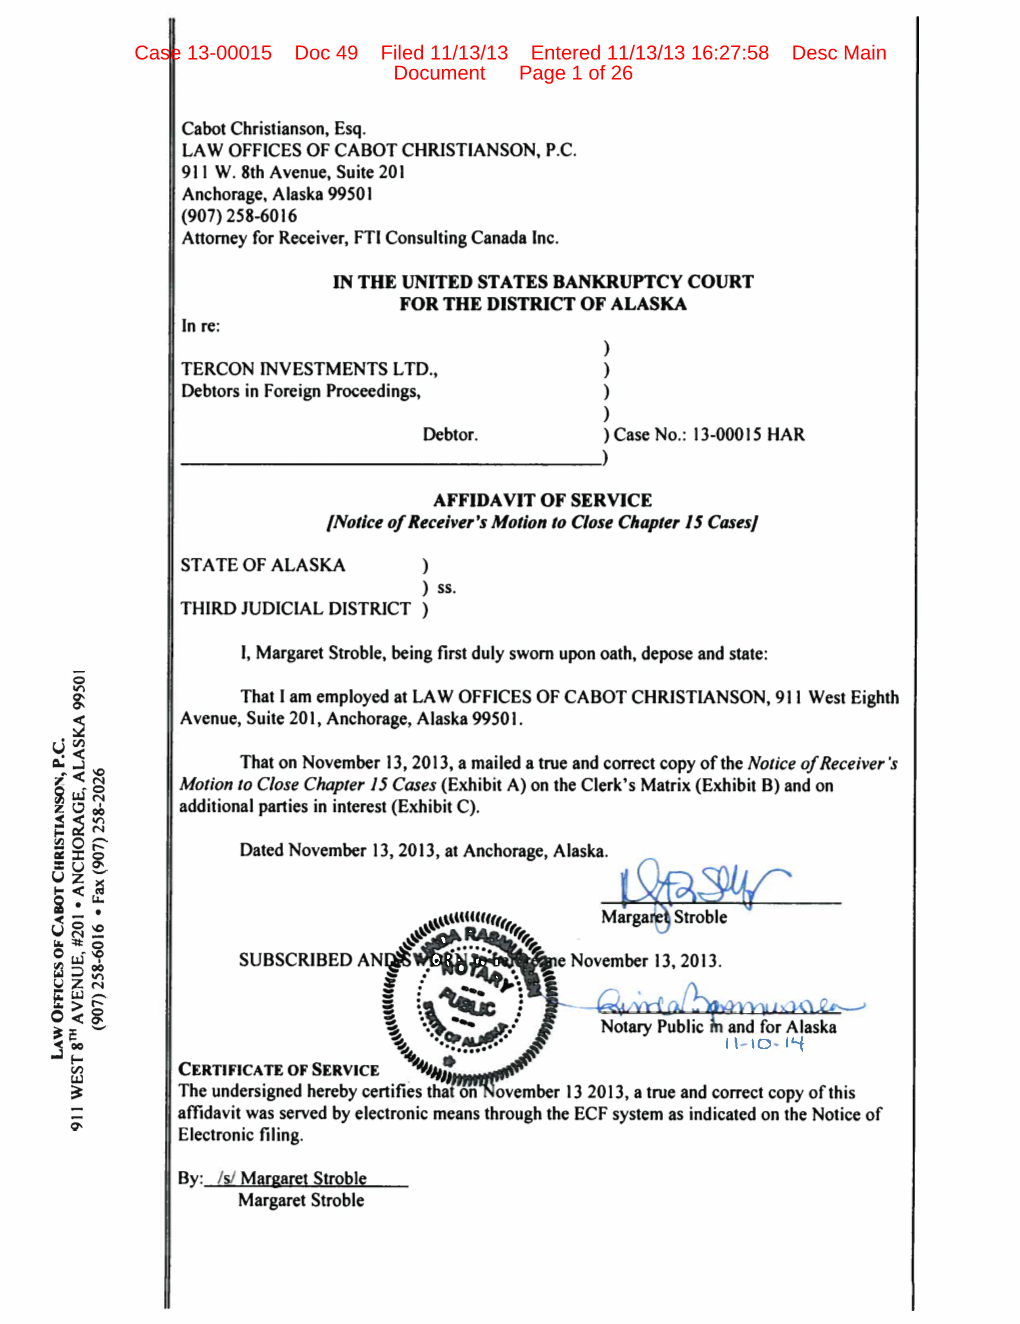 Case 13-00015 Doc 49 Filed 11/13/13 Entered 11/13/13 16:27:58 Desc Main Document Page 1 of 26 LAW OFFICES of CABOT CHRISTIANSON, P.C